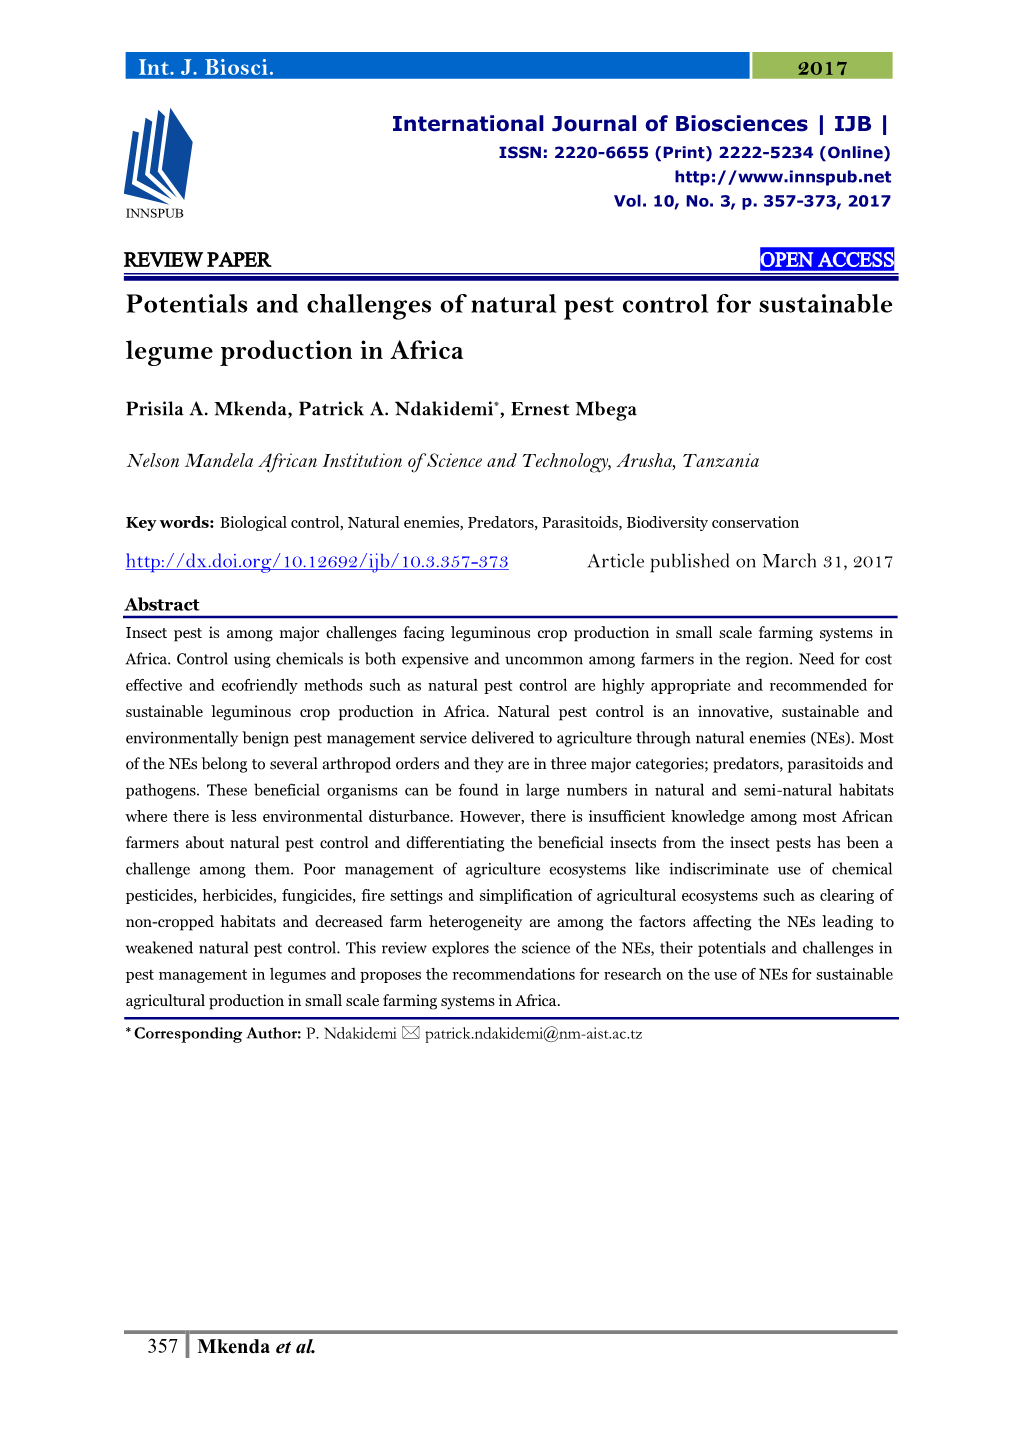 Potentials and Challenges of Natural Pest Control for Sustainable Legume Production in Africa